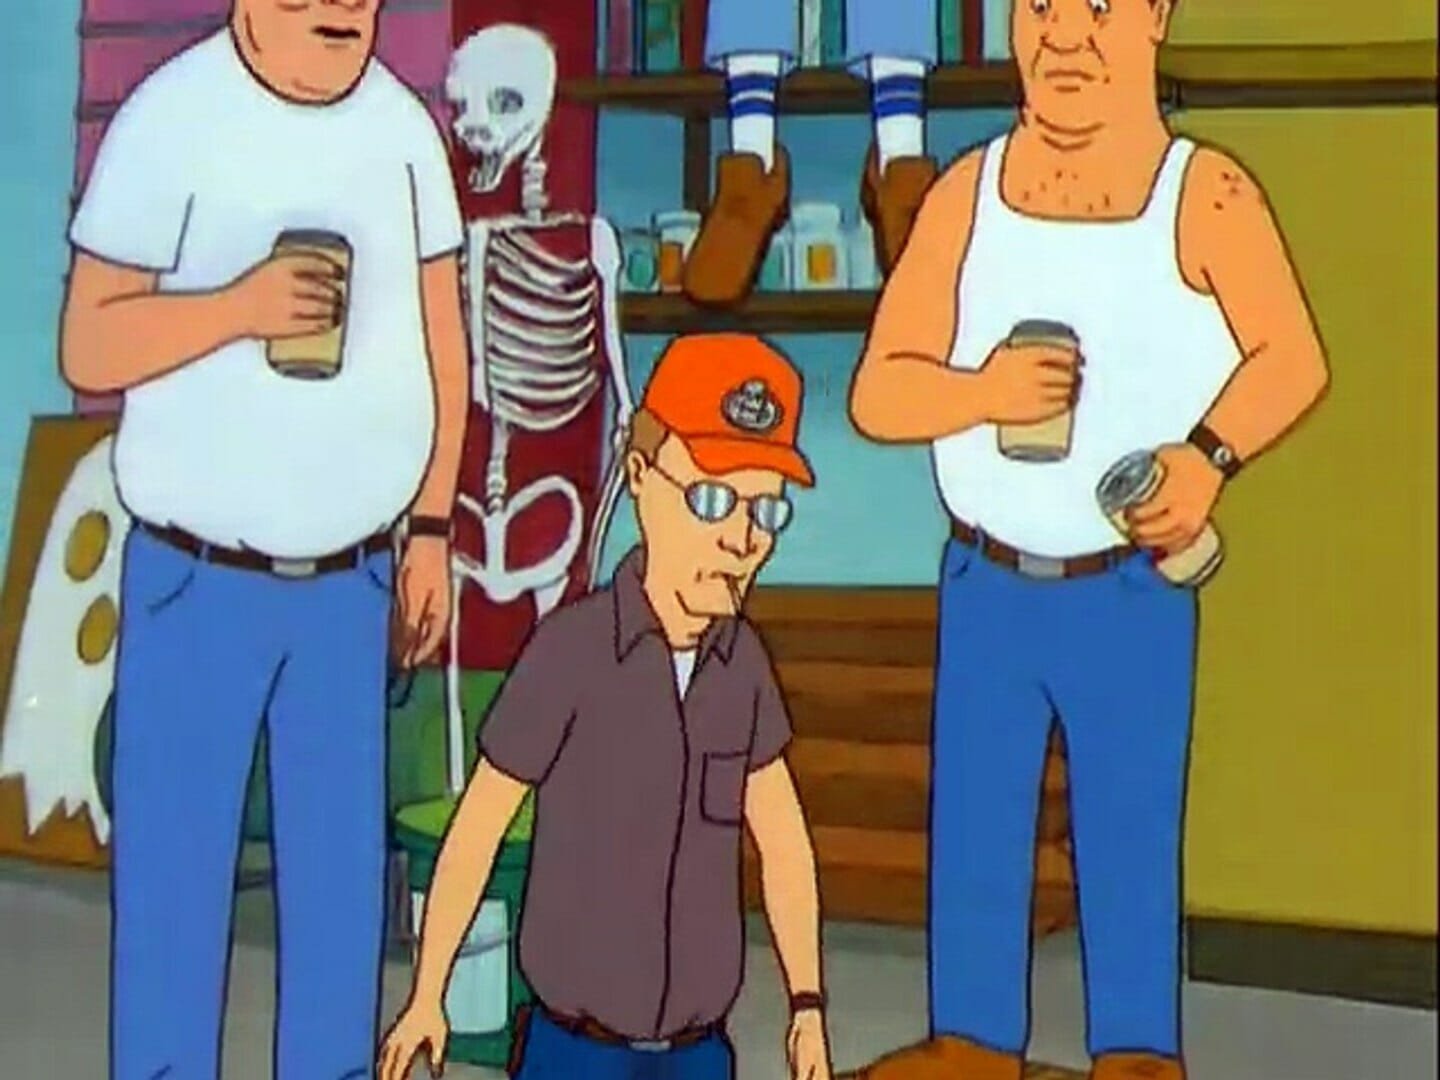 Best king of the hill episodes: Halloween (Season 2, Episode 4)